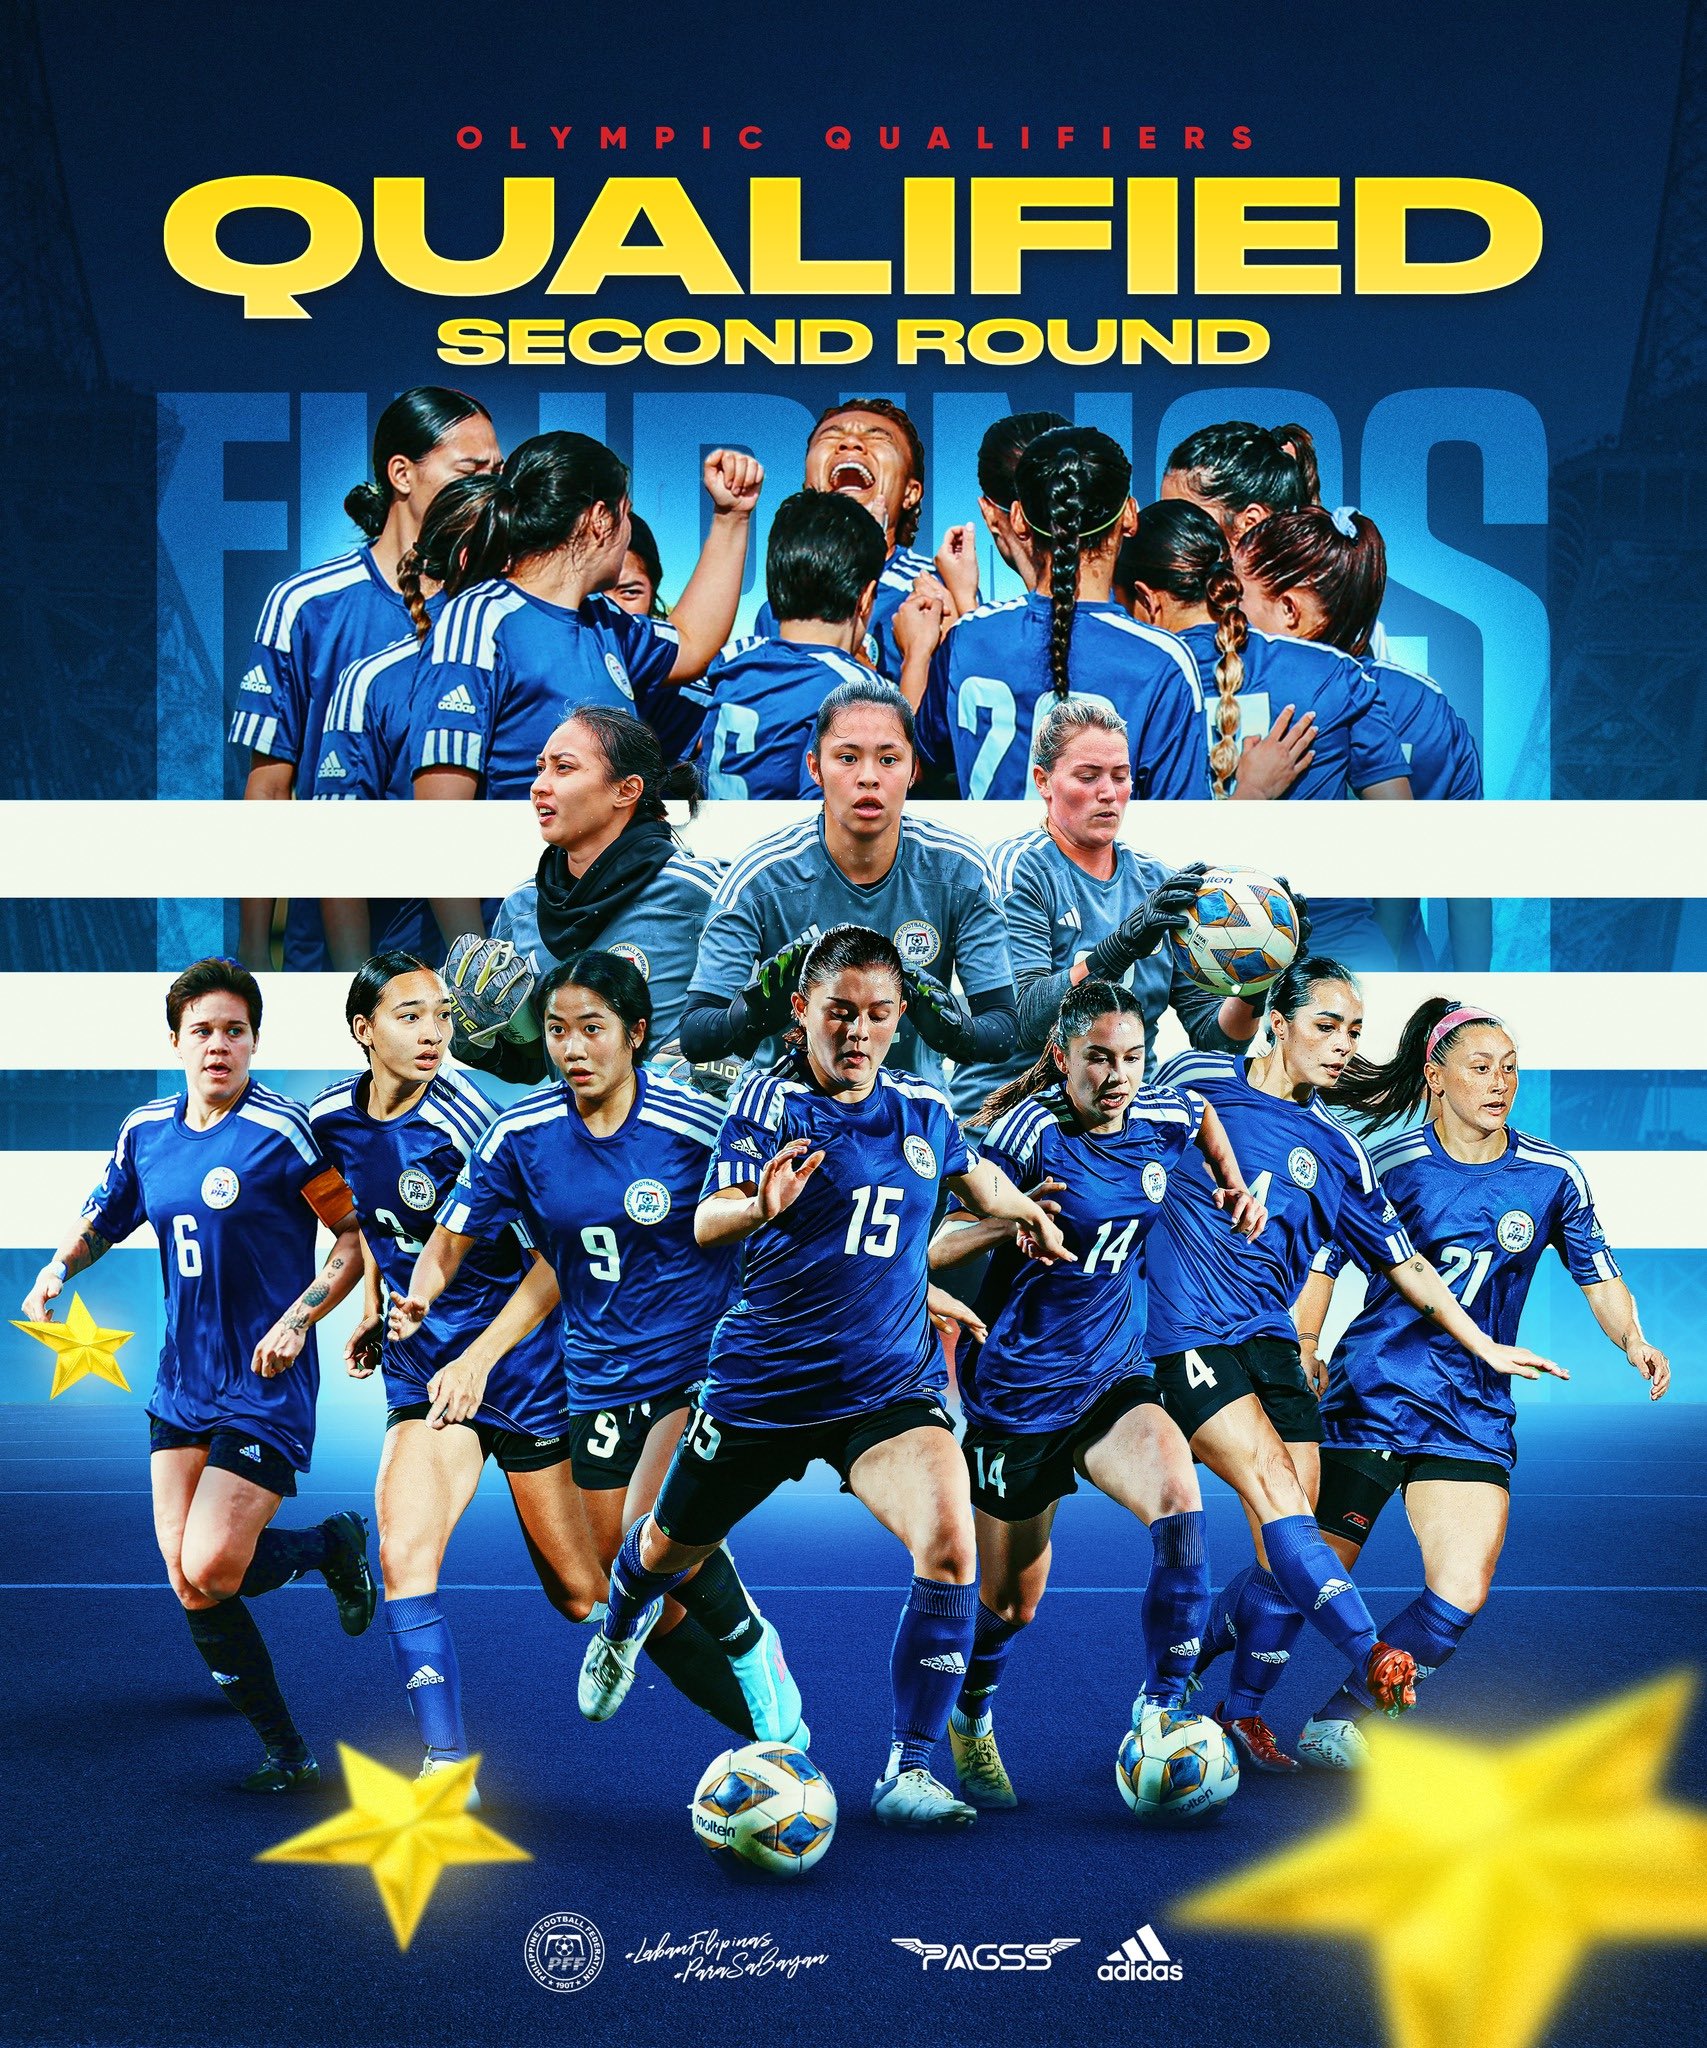 Filipinas Olympic Qualifiers Second Round poster